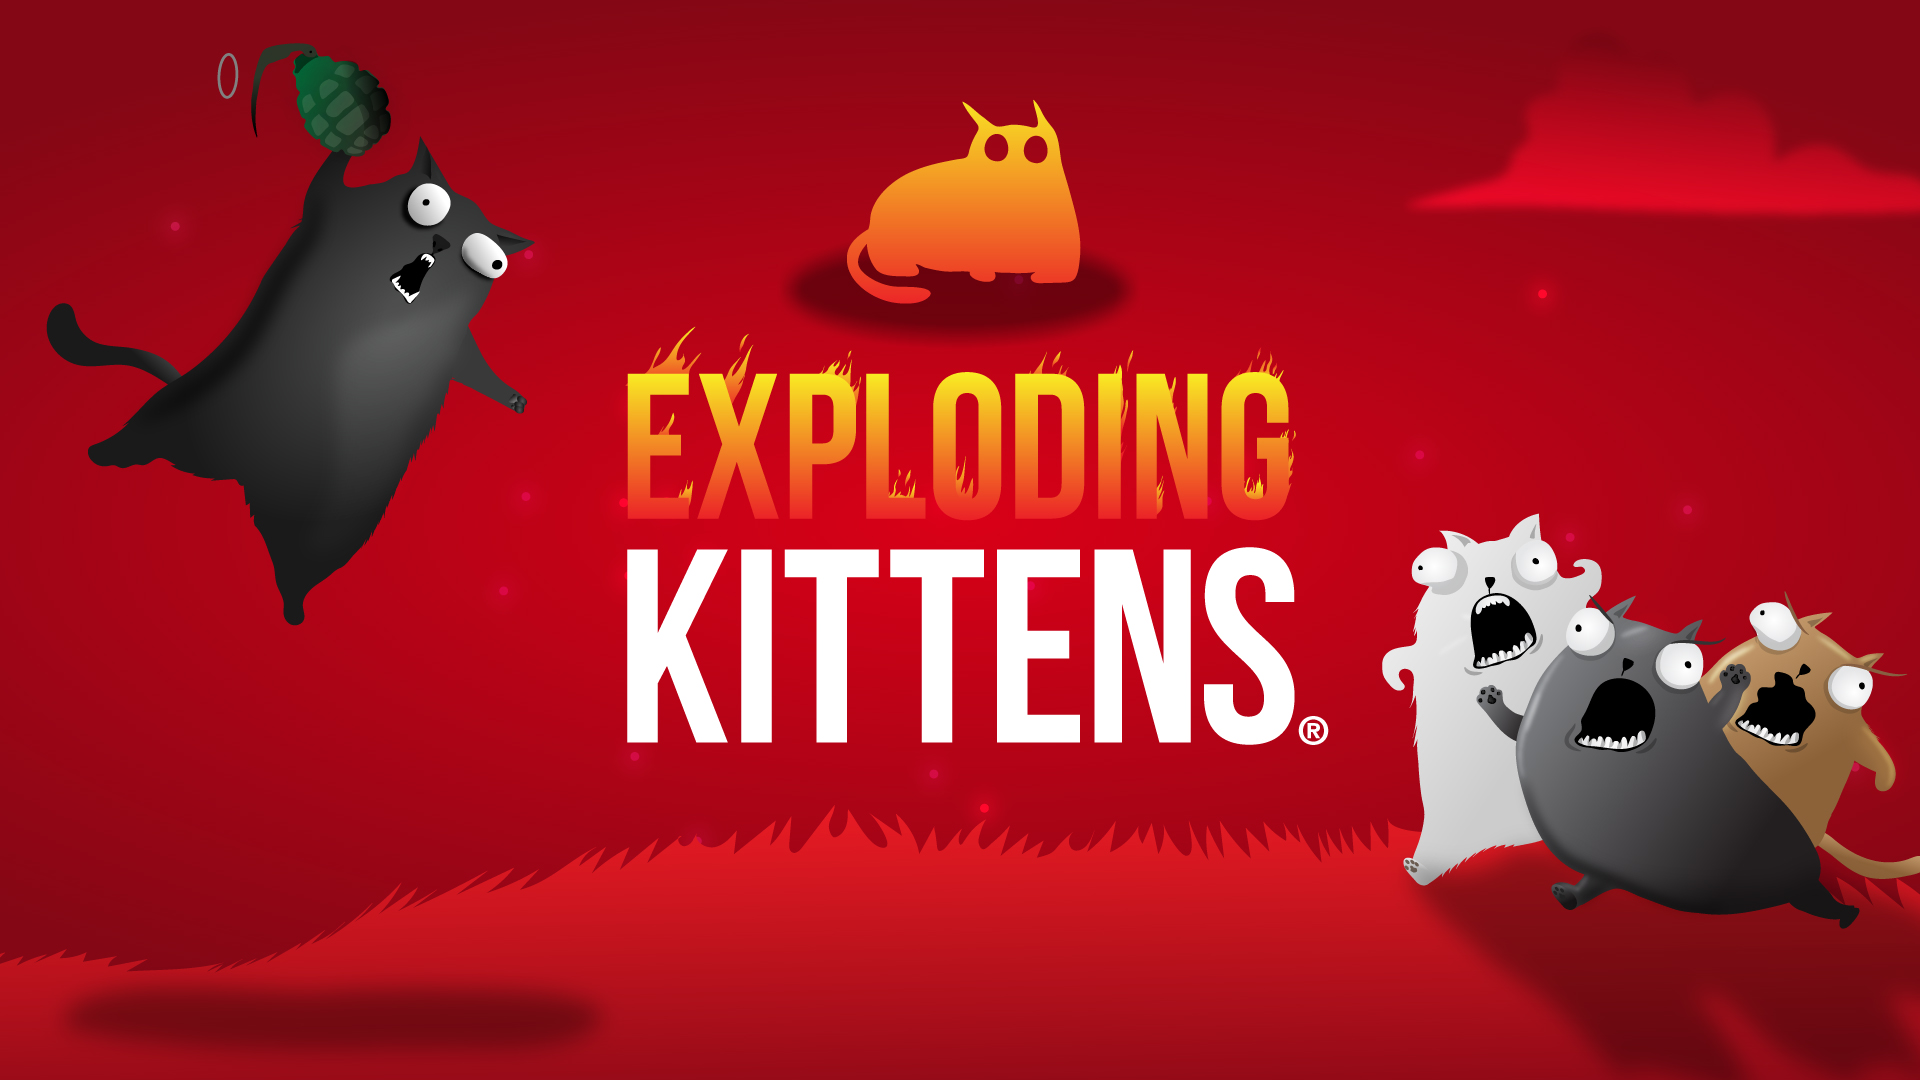 Exploding Kittens - key art, showing a yelling kitten about to dunk a grenade into a group of enemy kittens.